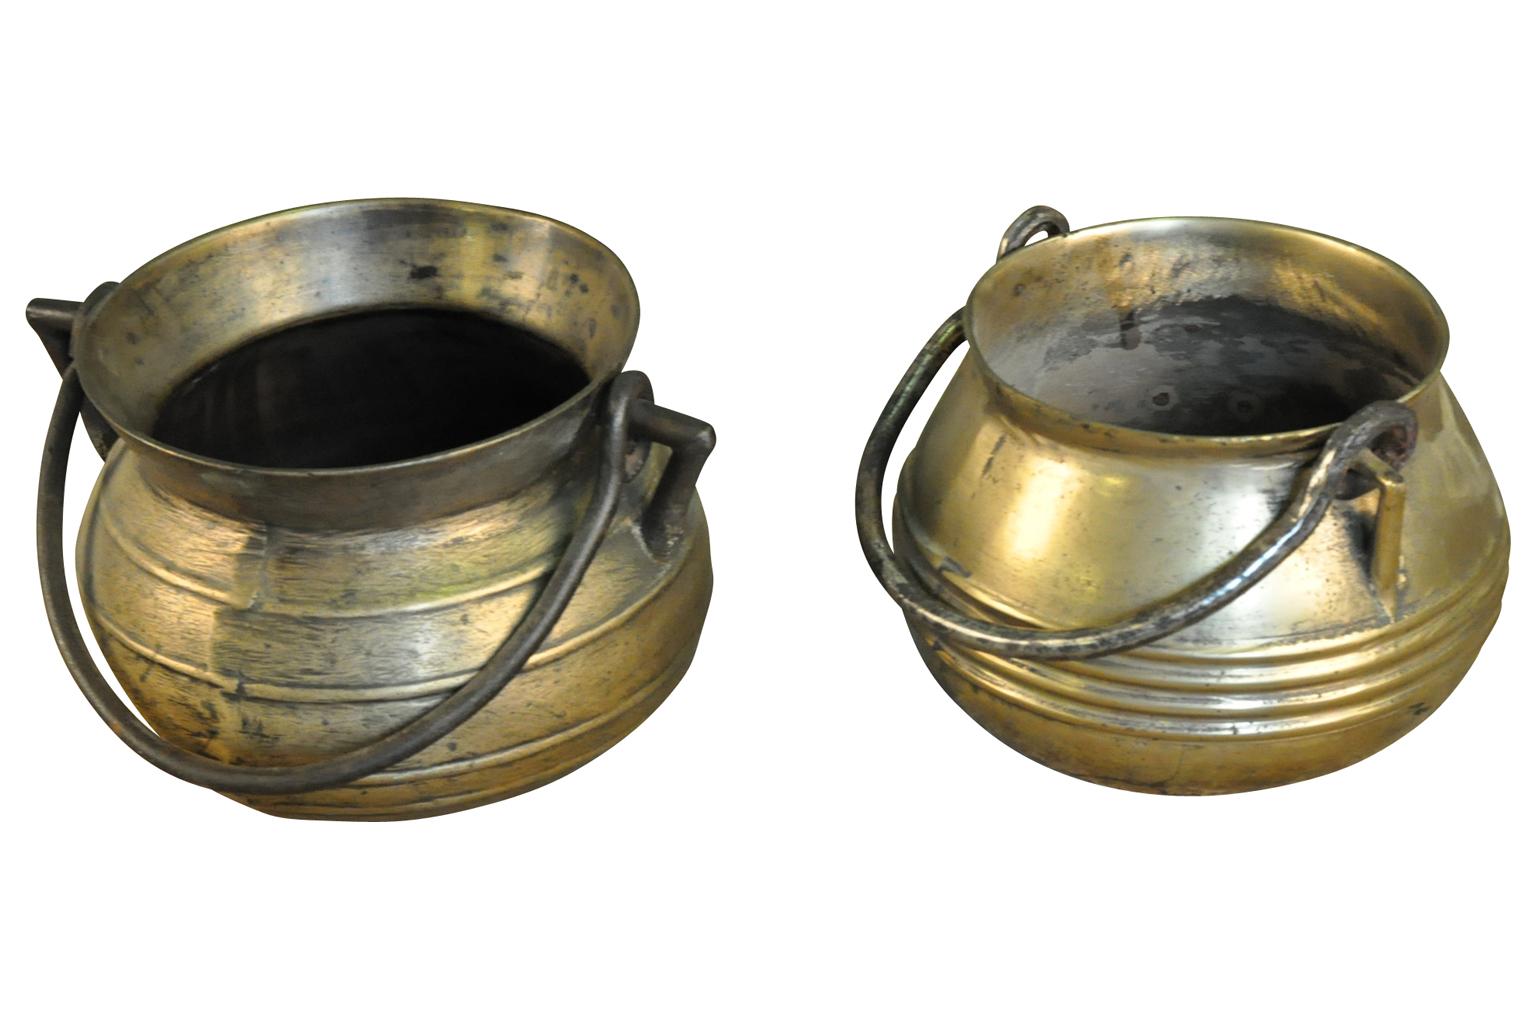 bronze pots for cooking